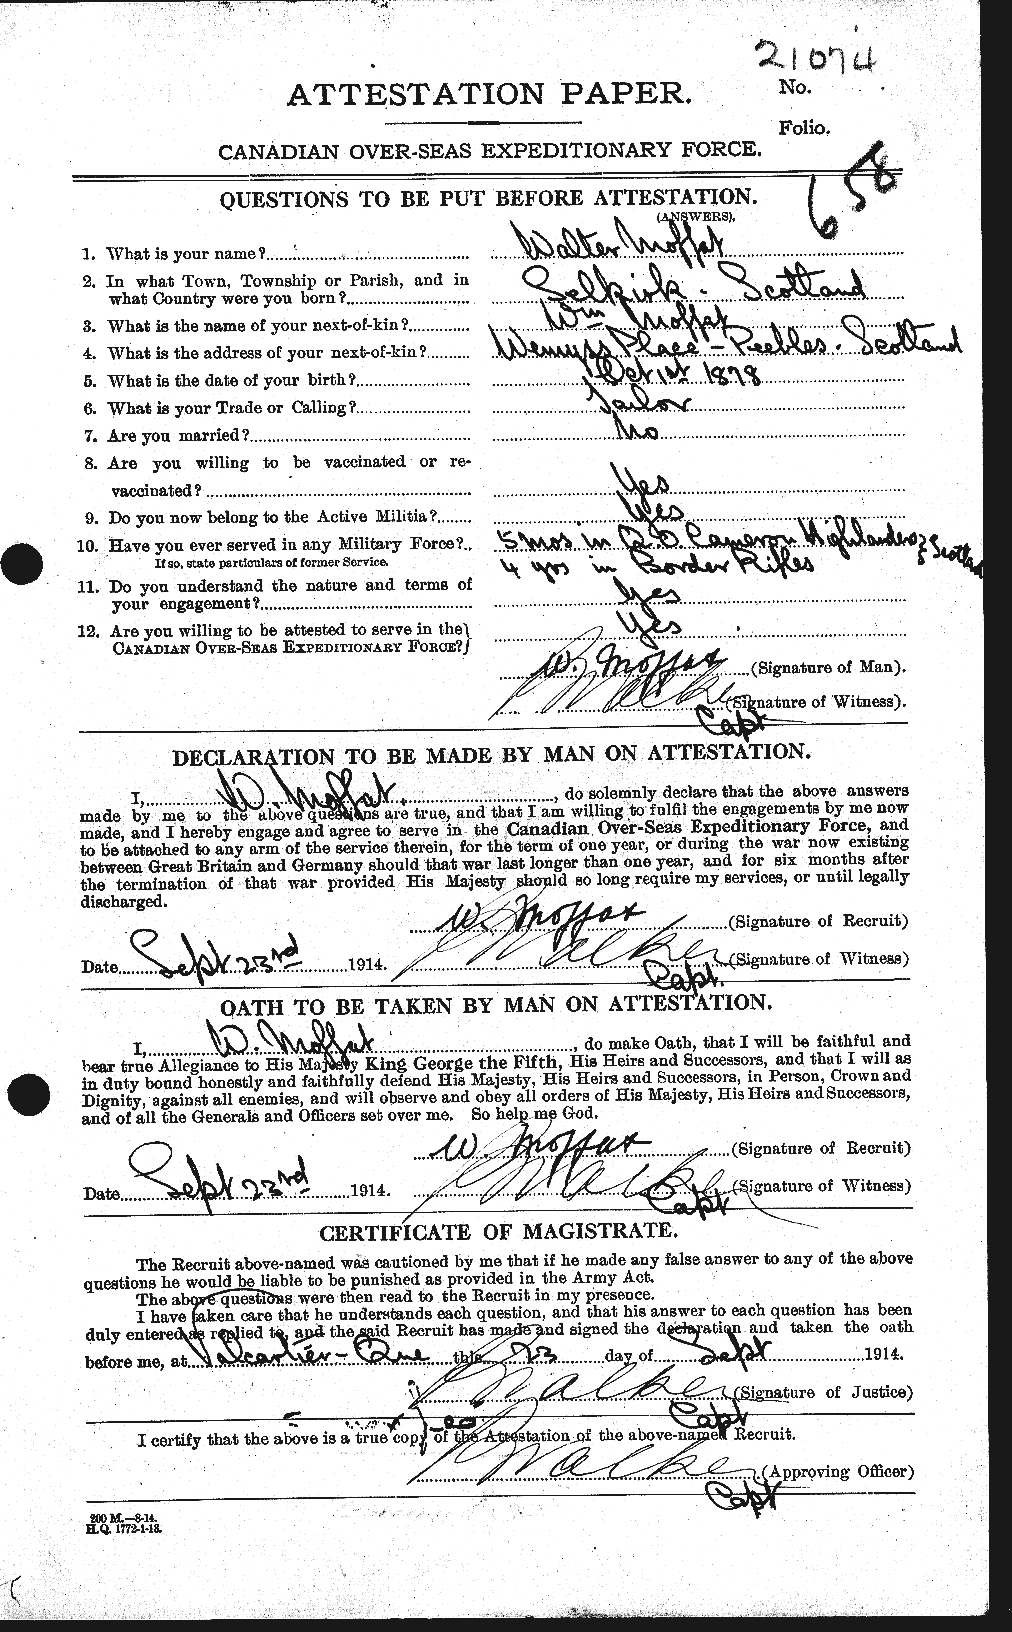 Personnel Records of the First World War - CEF 499080a